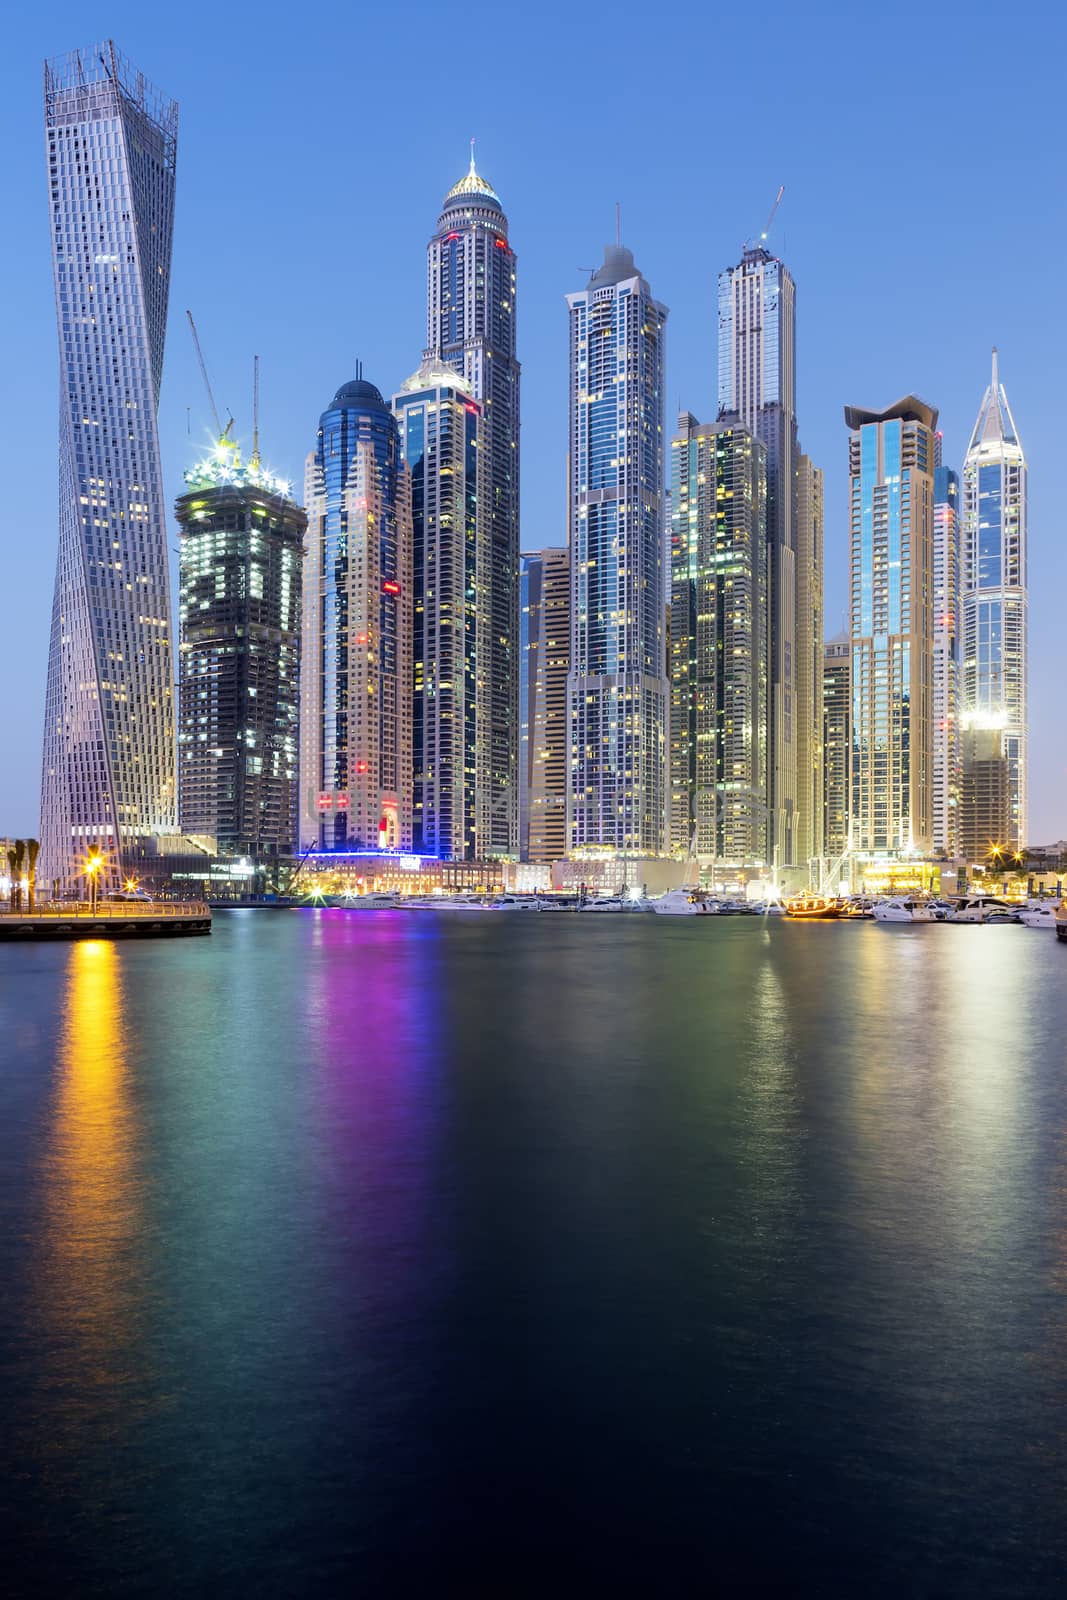 Vertical view of Skyscrapers in Dubai Marina by vwalakte